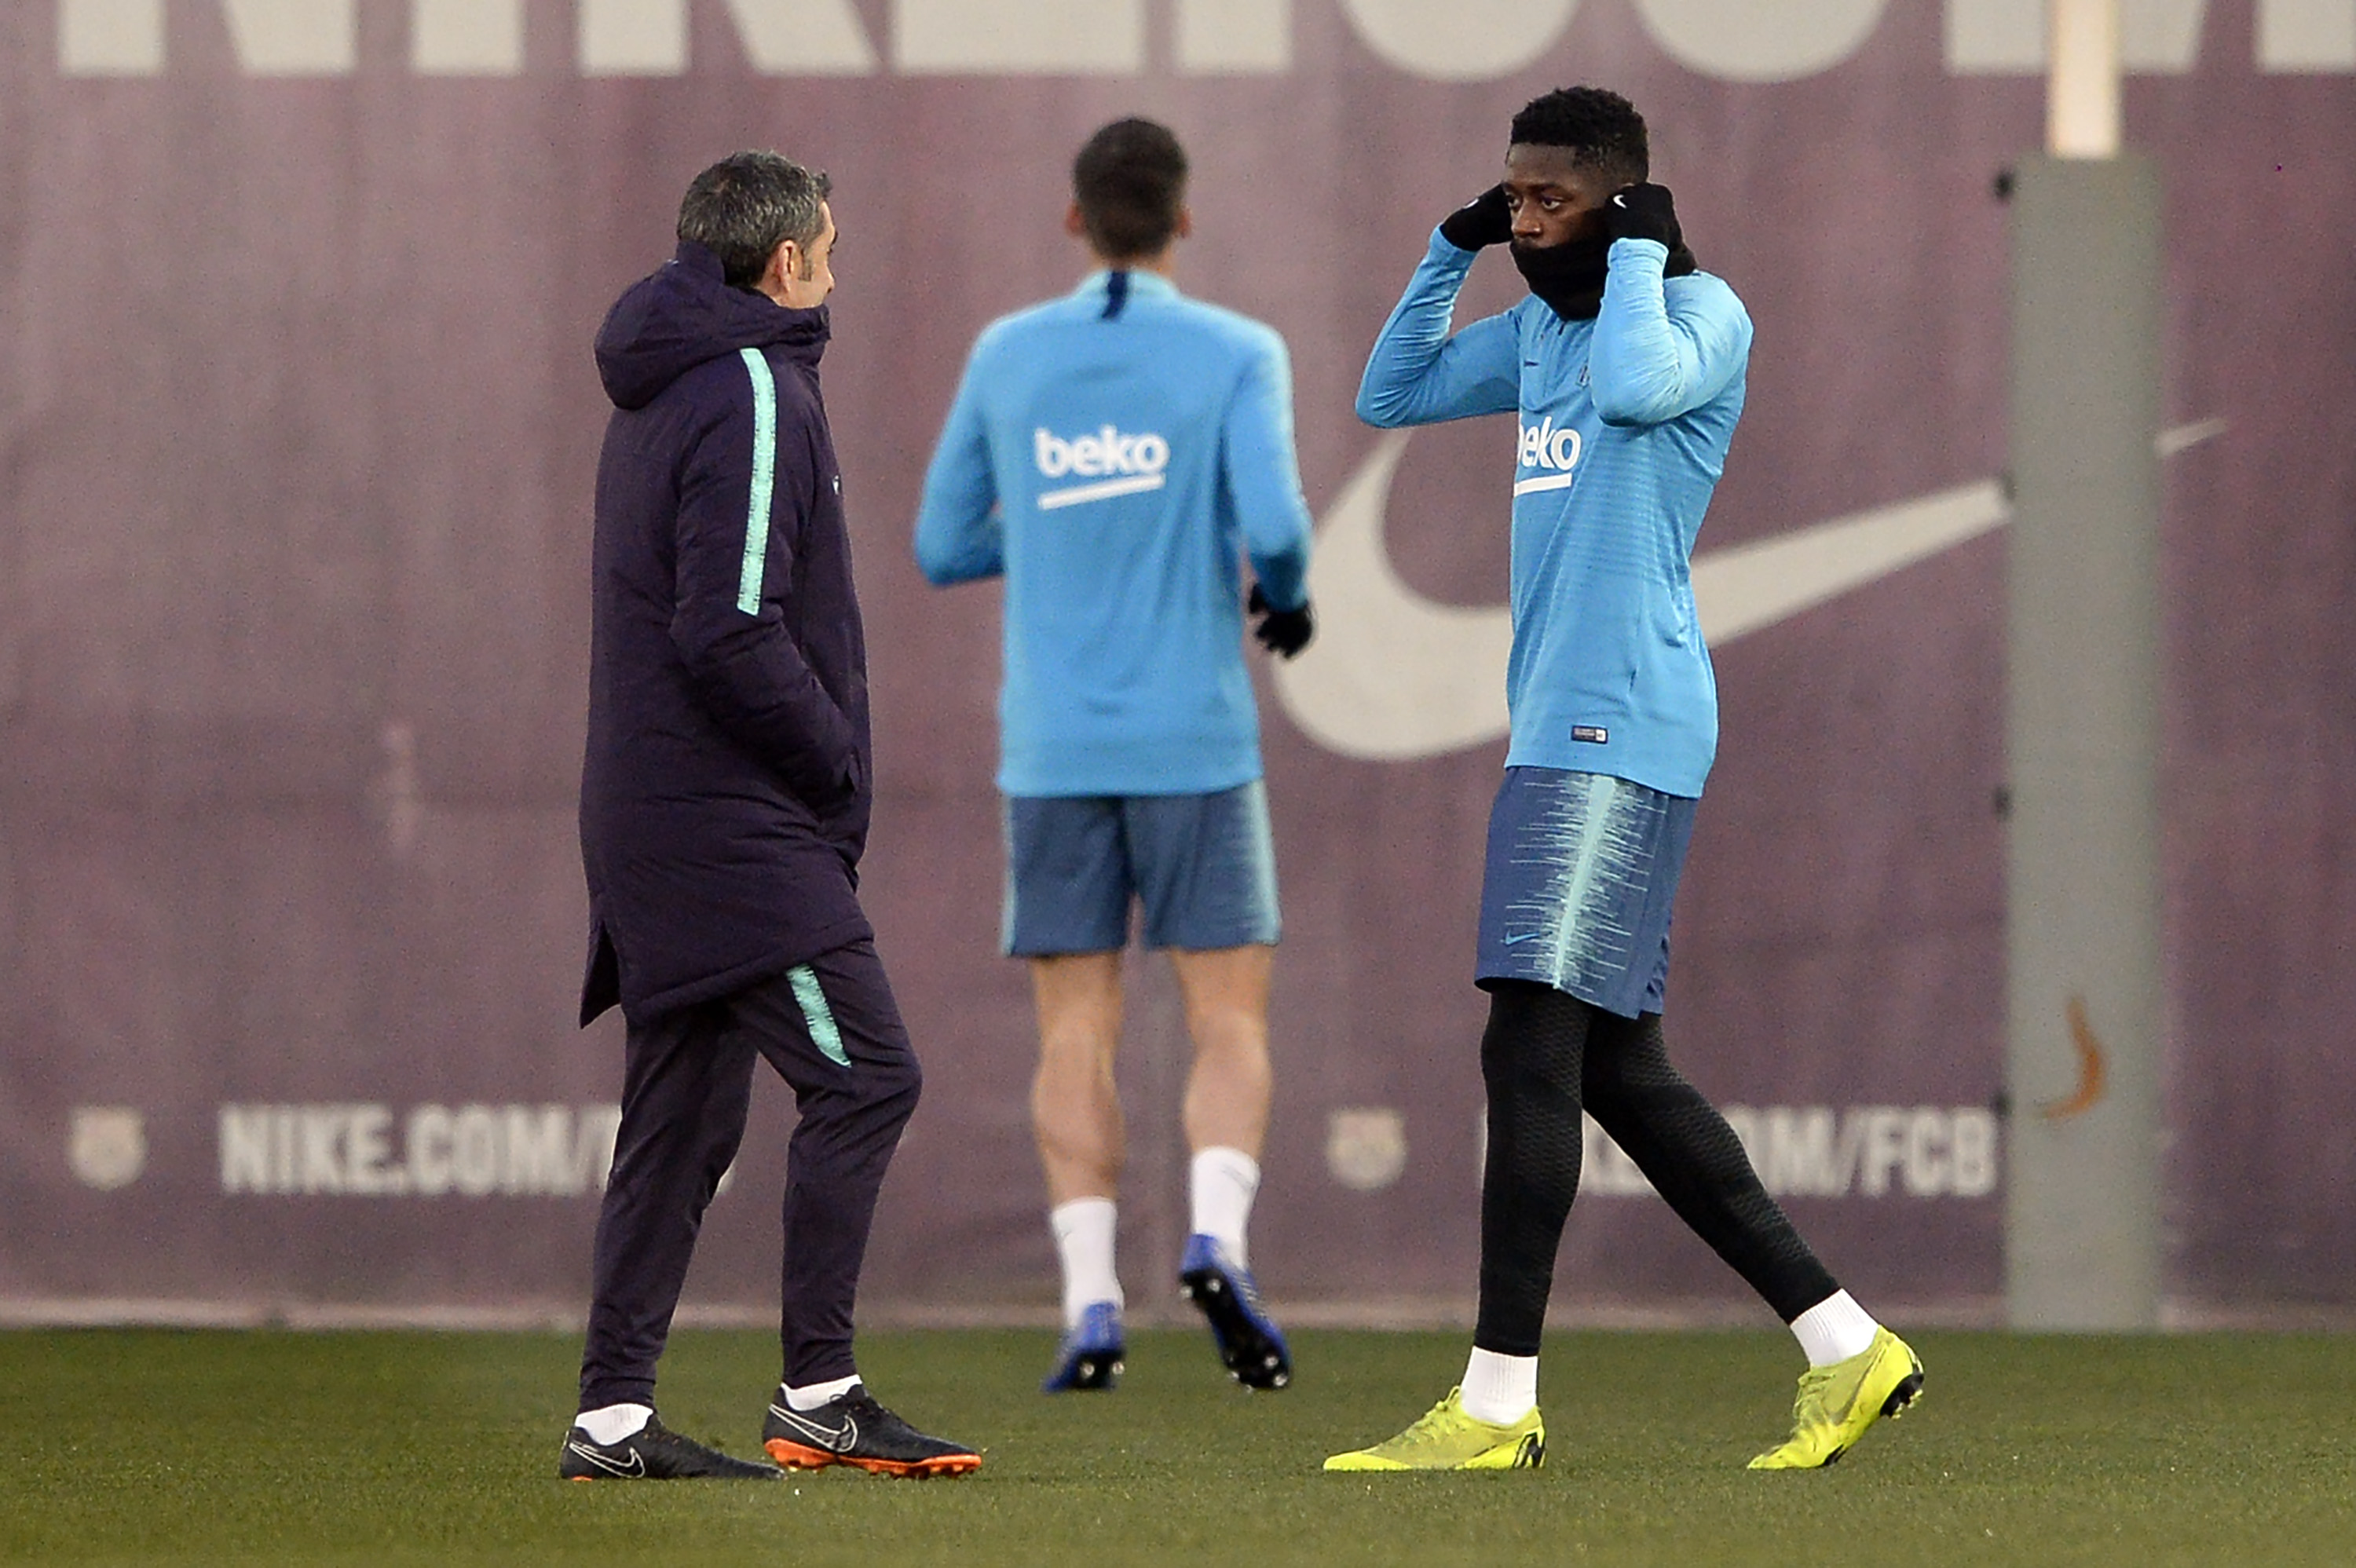 Barcelona's Spanish coach Ernesto Valverde (L) talks with Barcelona's French forward Ousmane Dembele during a training session at the Joan Gamper Sports Center in Sant Joan Despi on February 5, 2019. (Photo by Josep LAGO / AFP)        (Photo credit should read JOSEP LAGO/AFP/Getty Images)